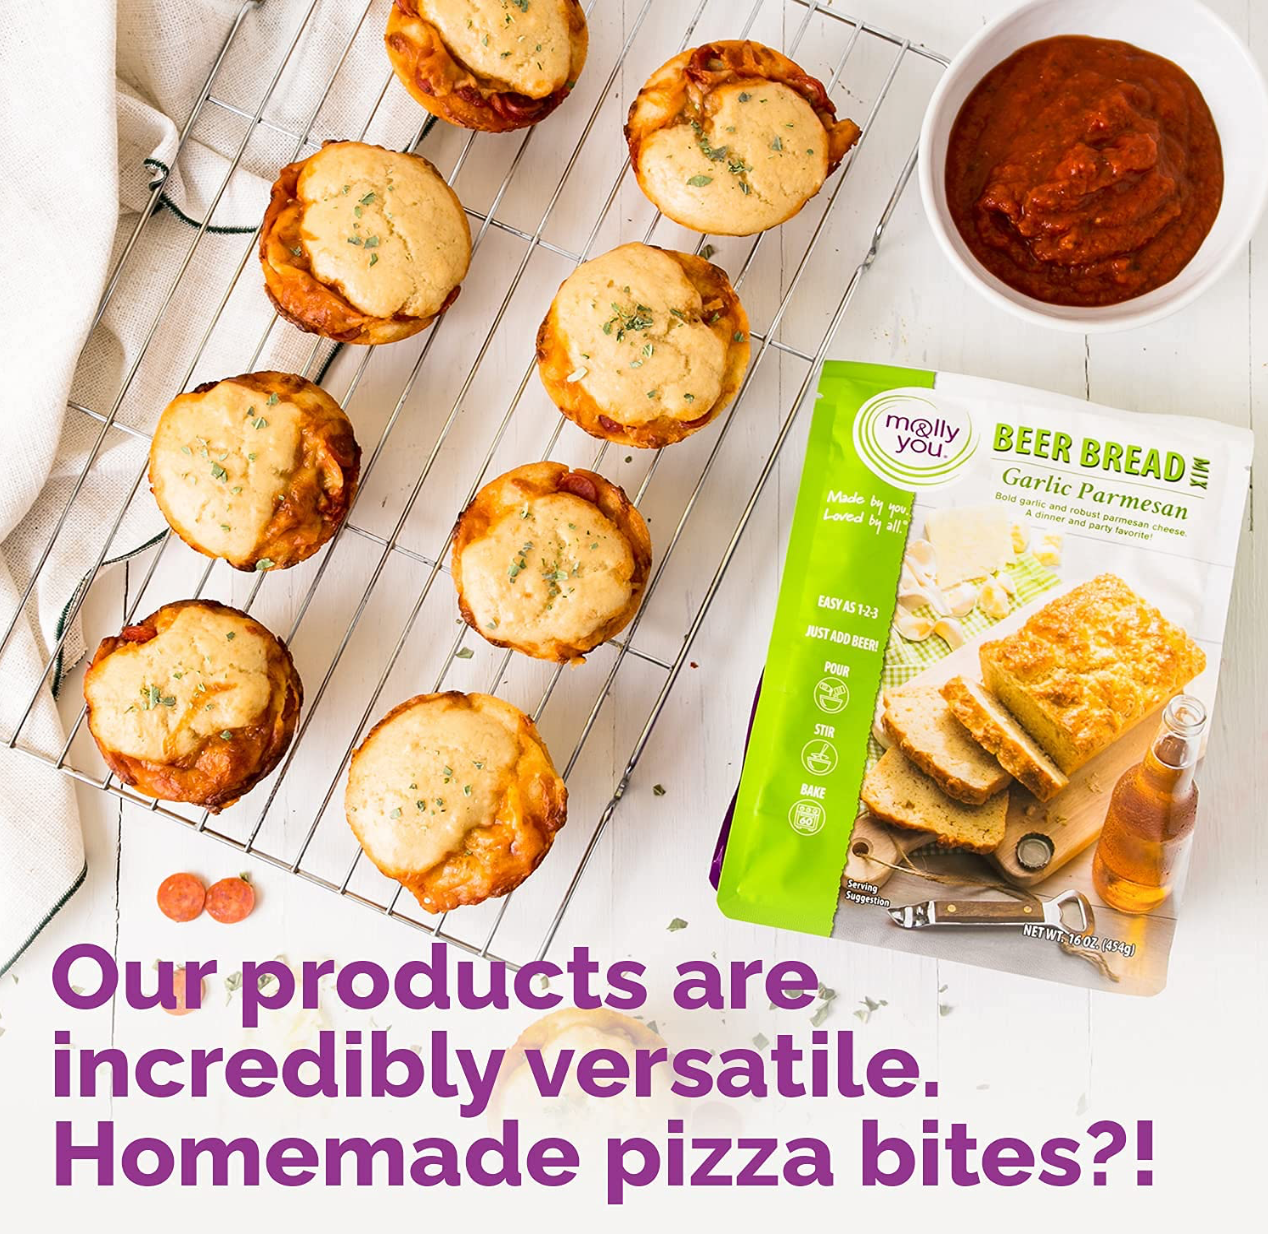 Our products are incredibly versatile. Homemade pizza bites are a favorite!